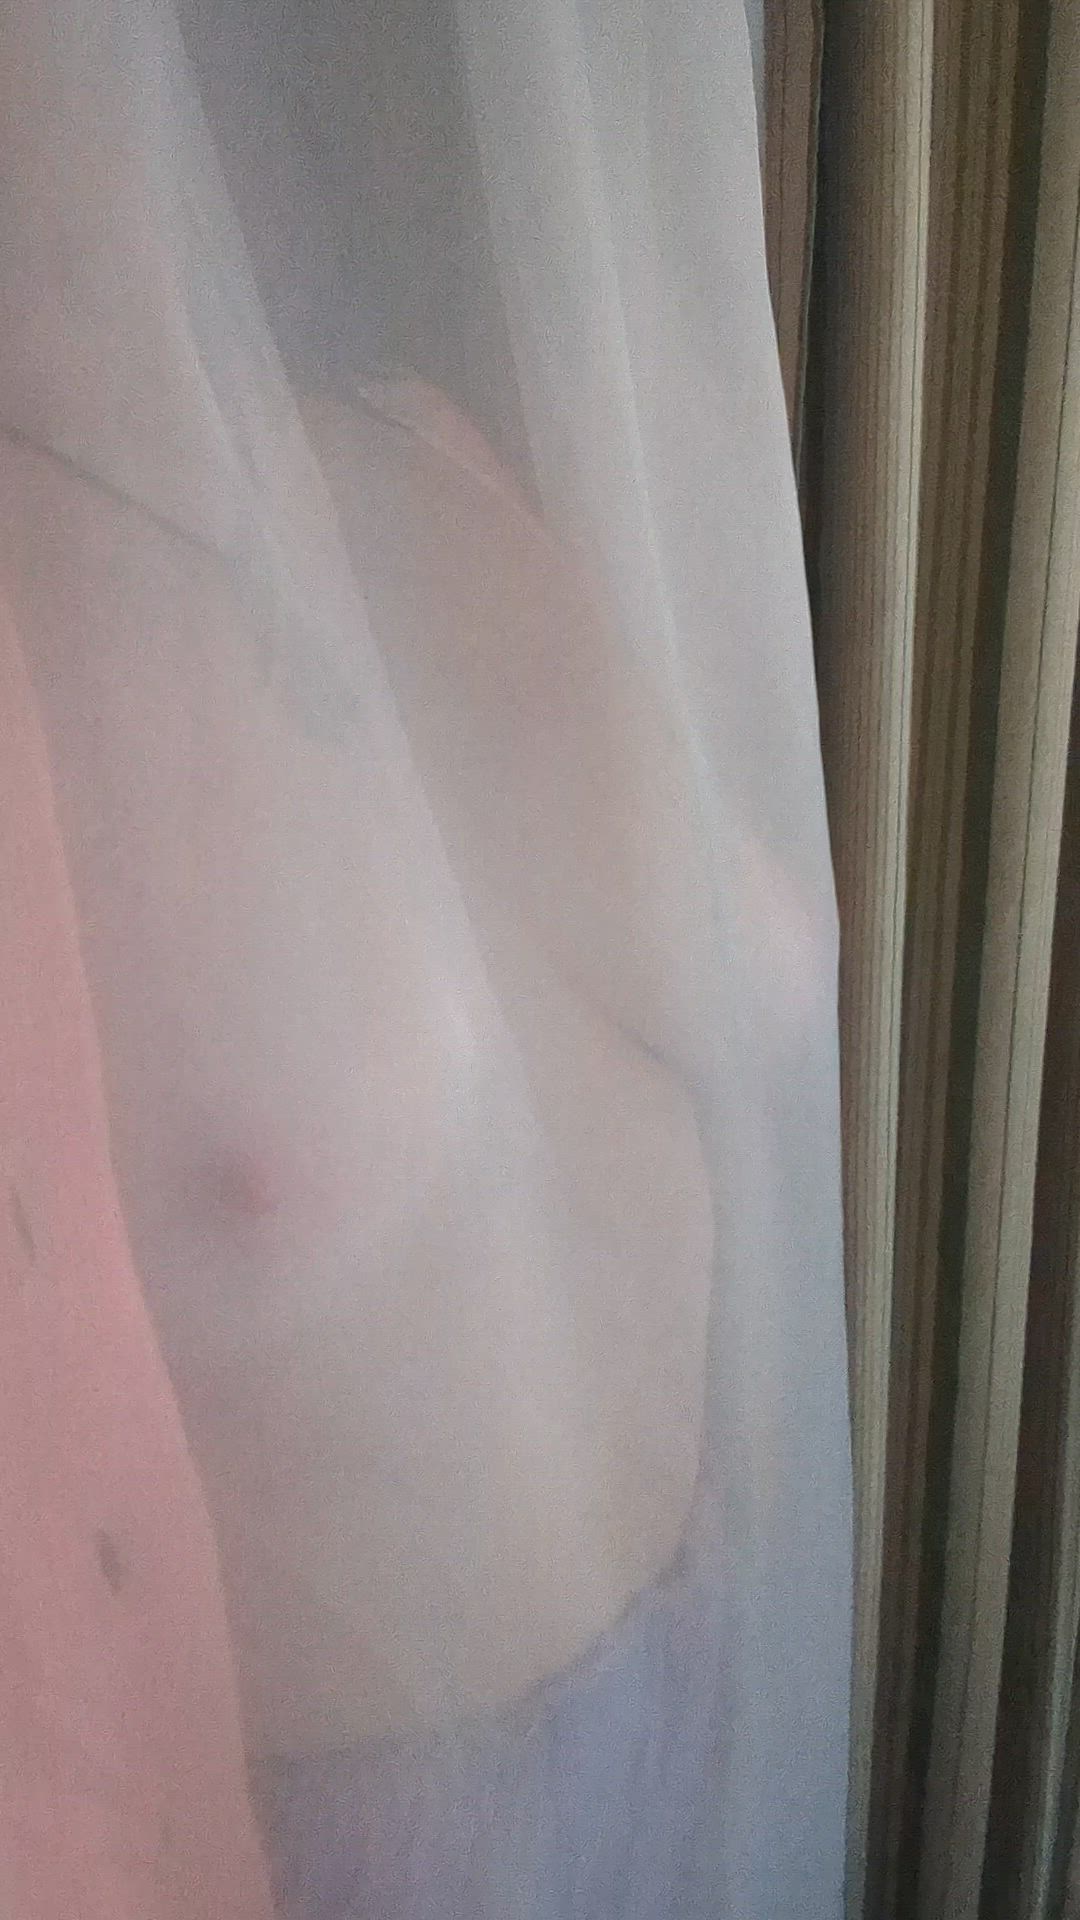 Tits porn video with onlyfans model aspriteinbloom <strong>@aspriteinbloom</strong>